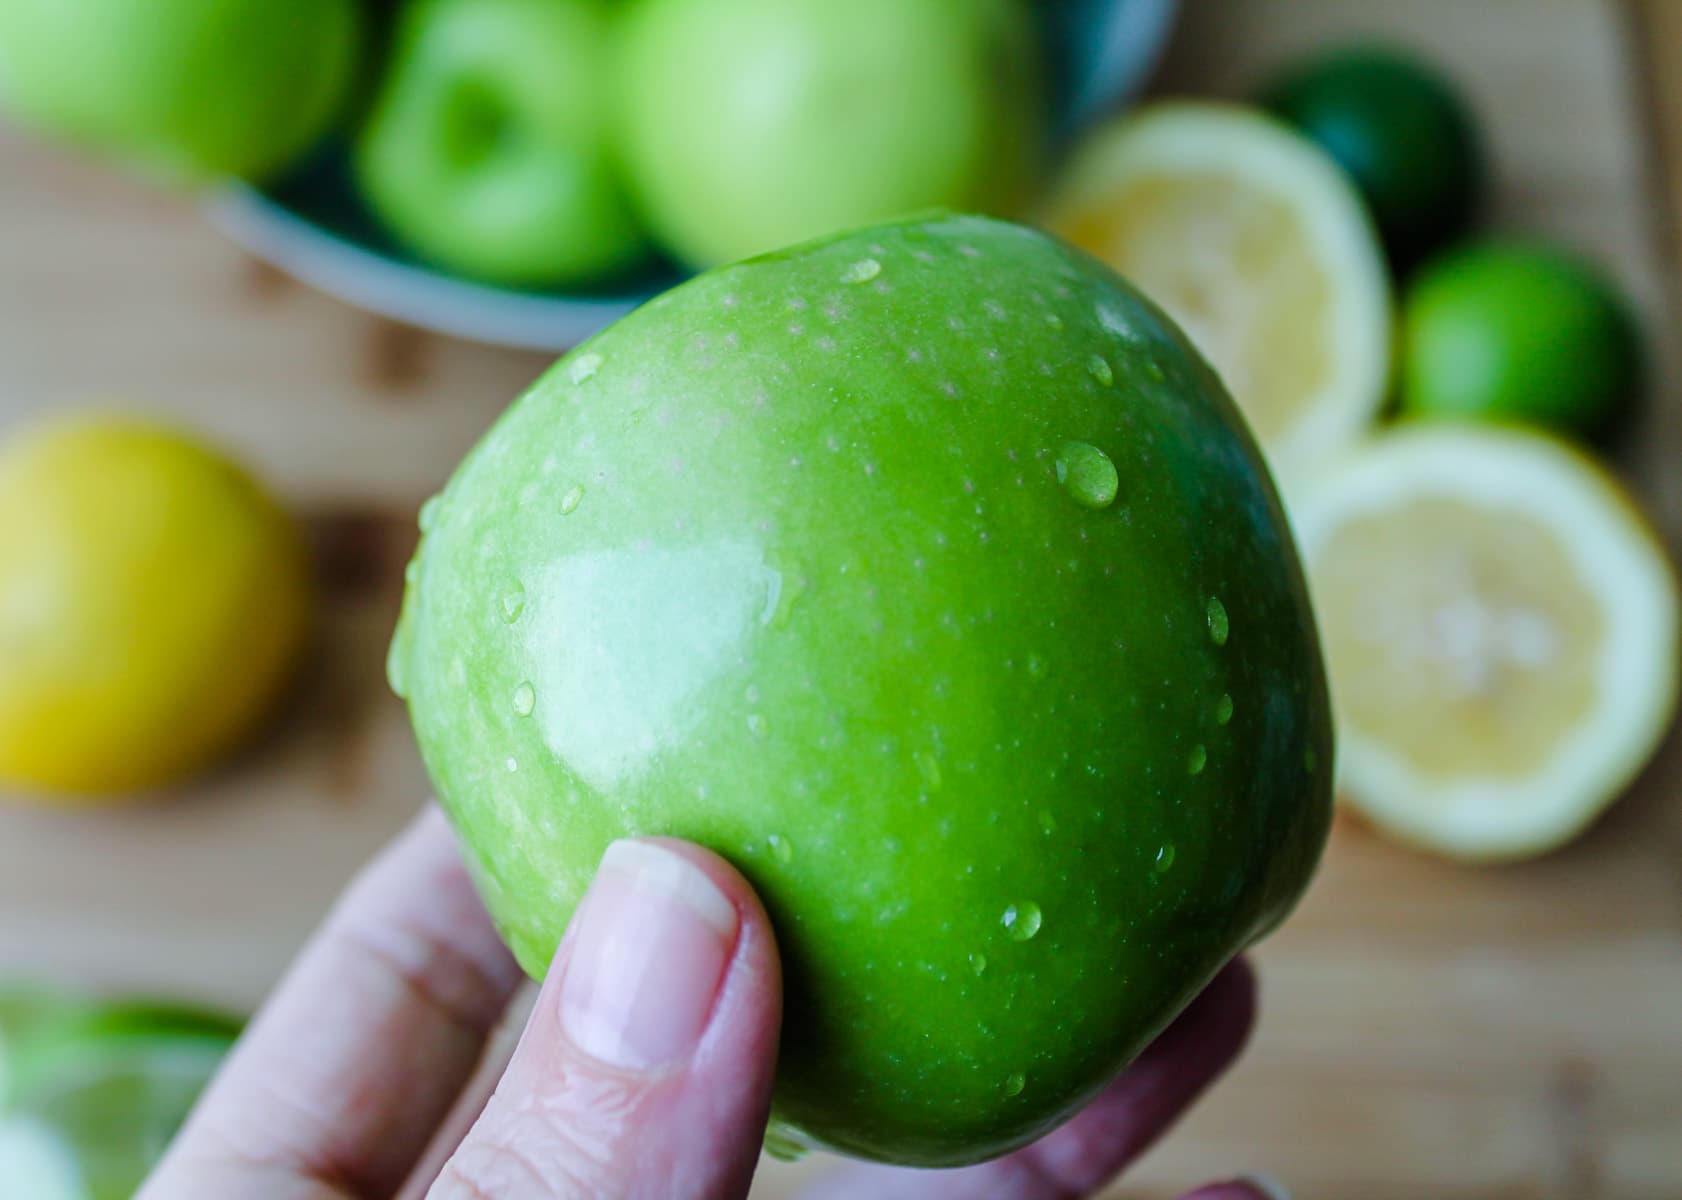 a hand holding a green apple.